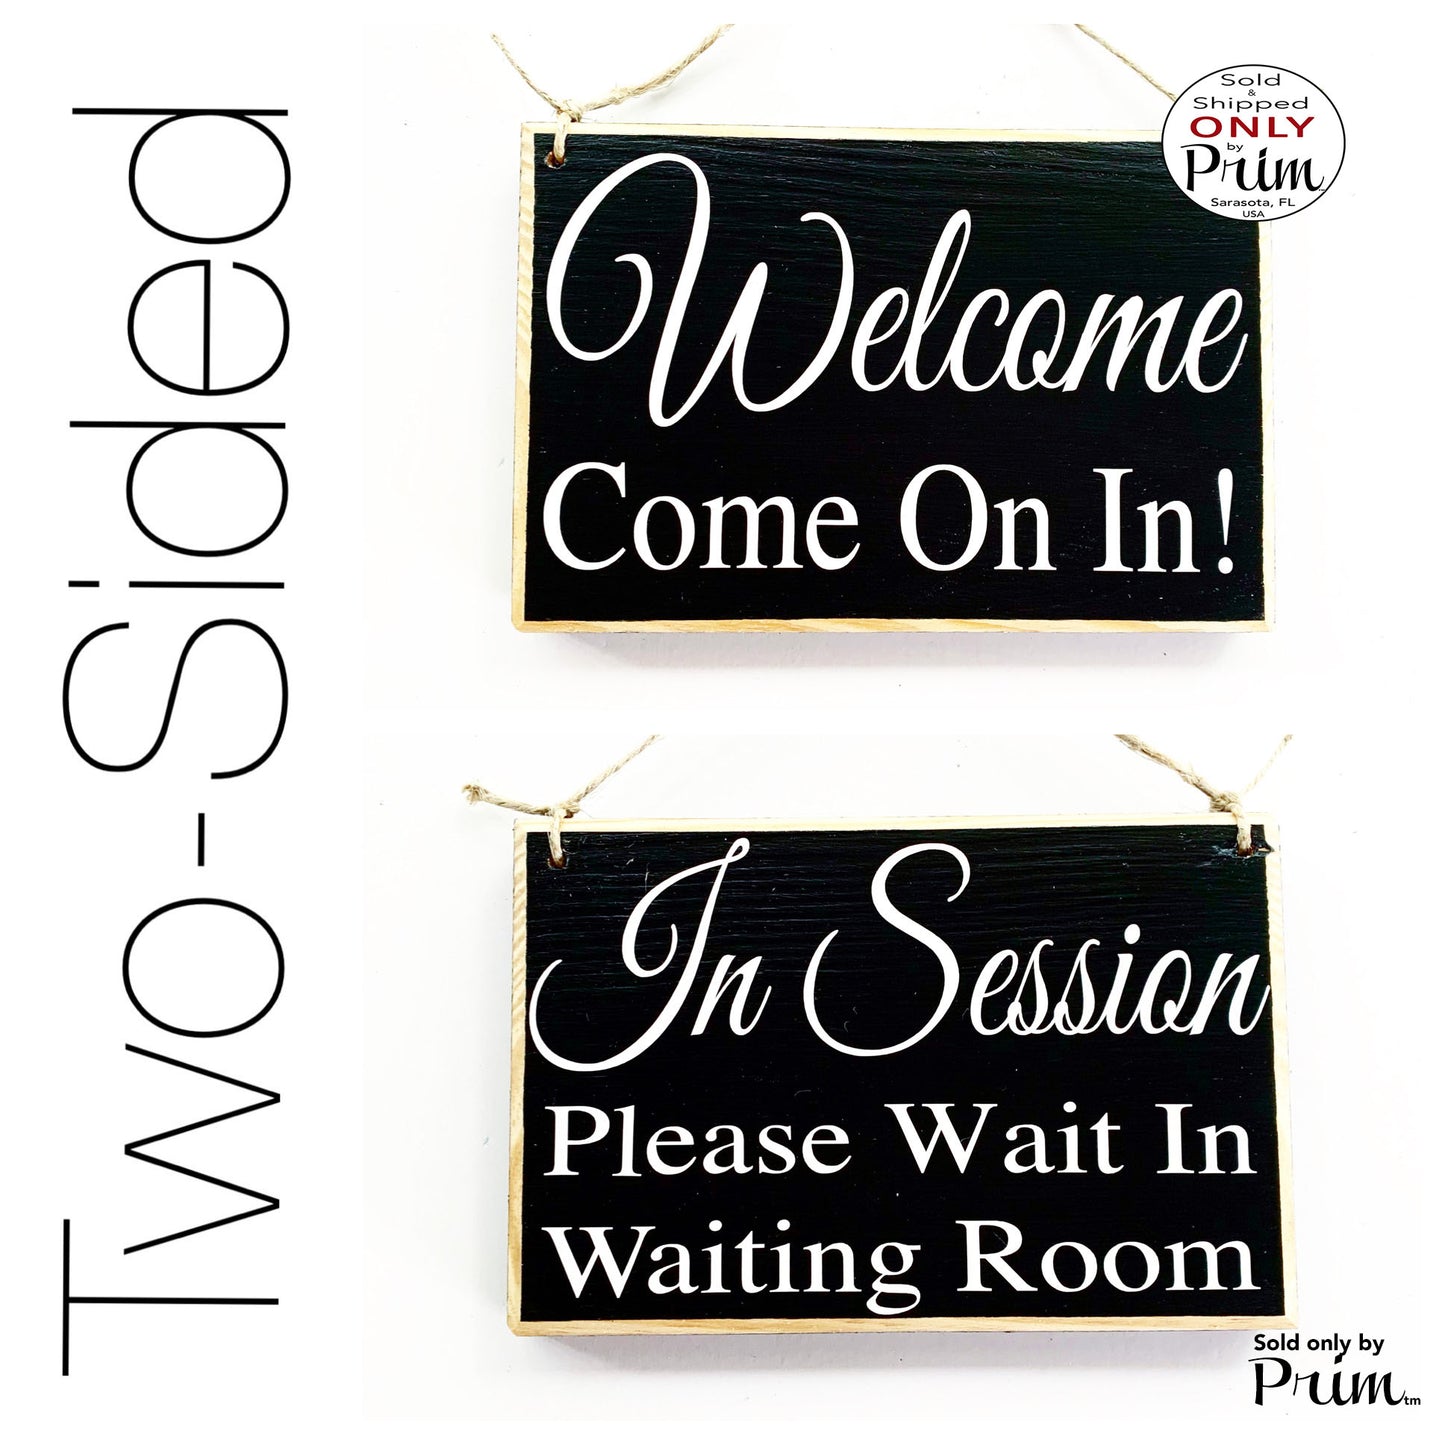 8x6 In Session Please Wait In Waiting Room Welcome Come on in Double Sided Custom Wood Sign Spa Salon Office Progress Shhh Door Plaque Designs by Prim